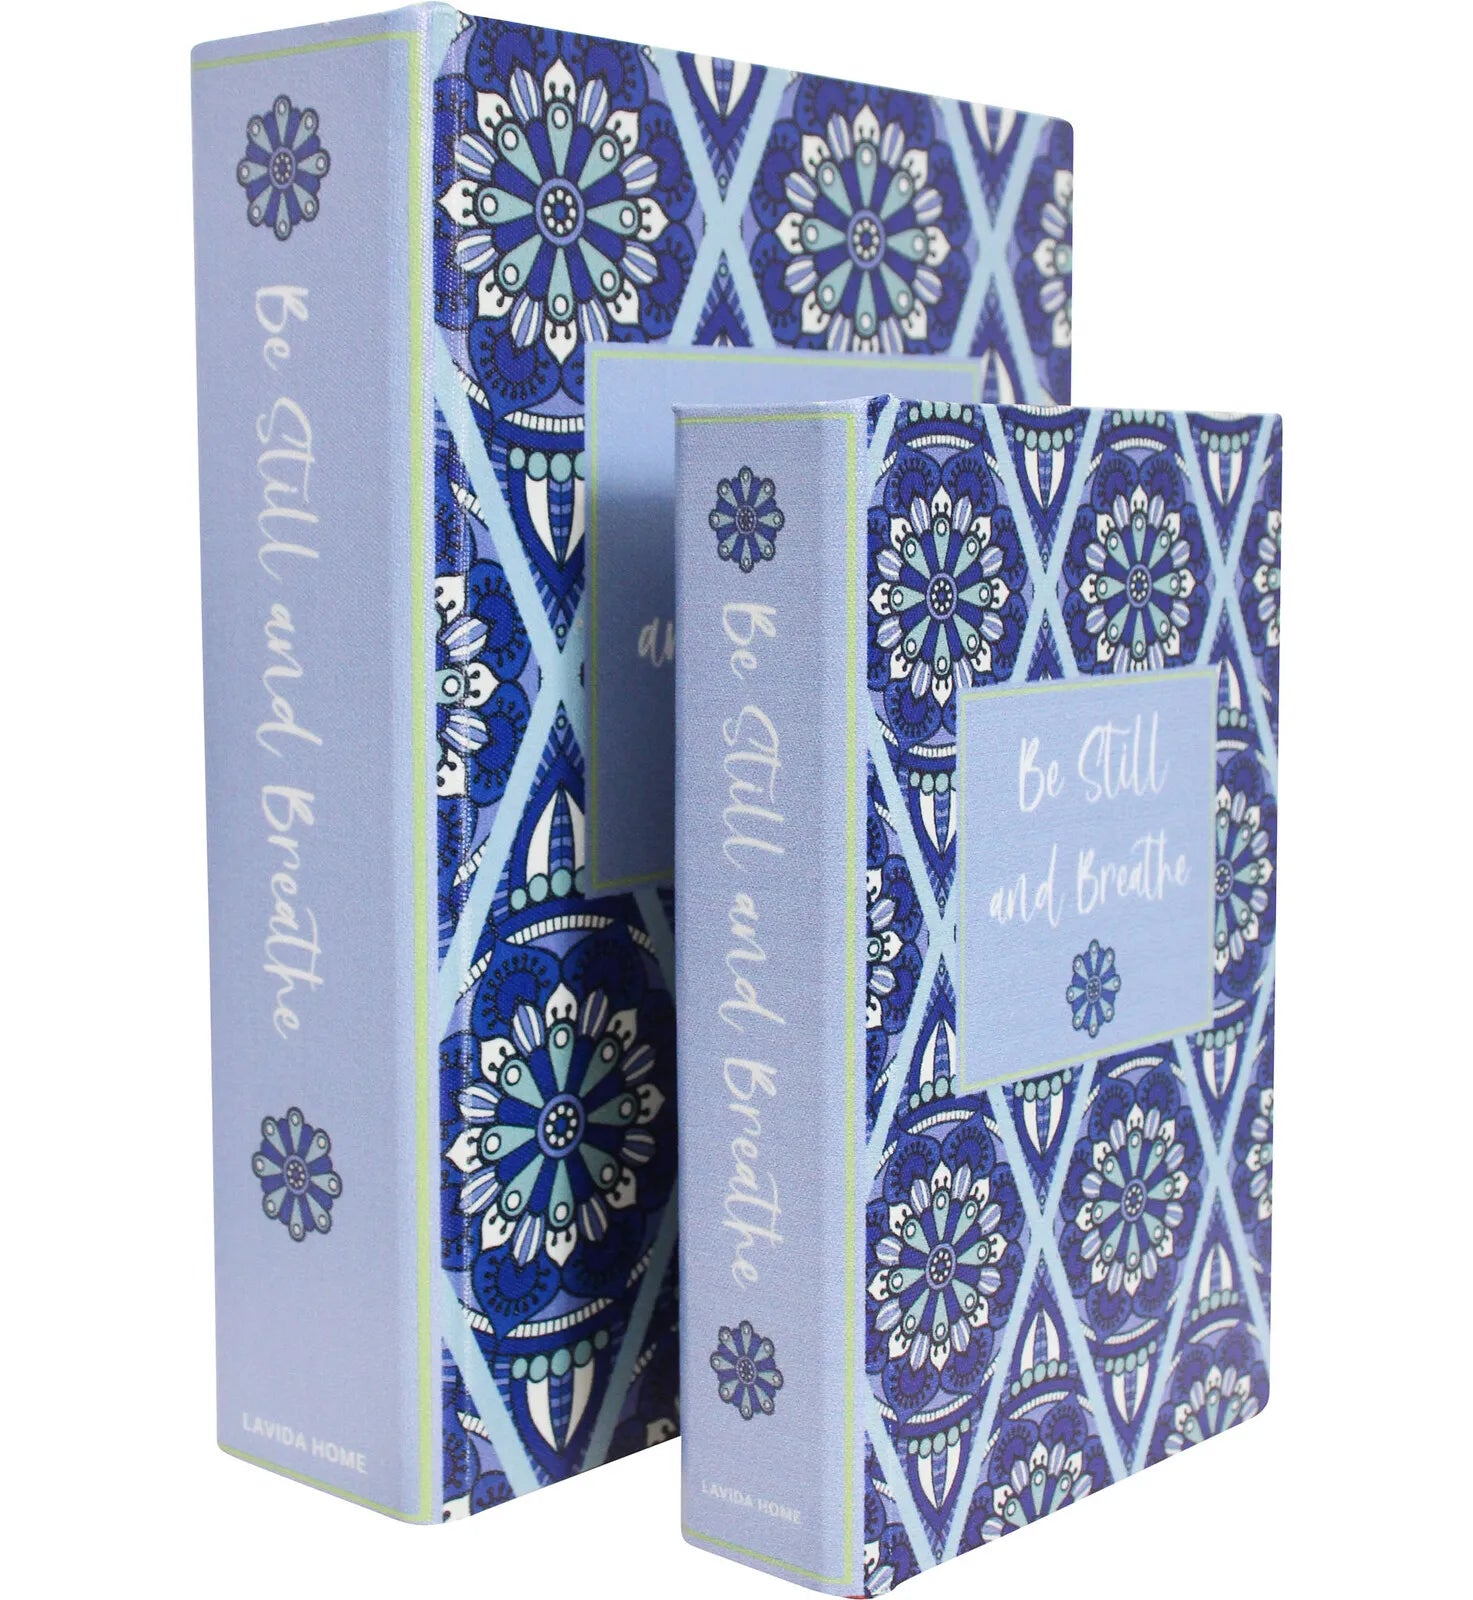 Be Still and Breathe Book Box set of 2